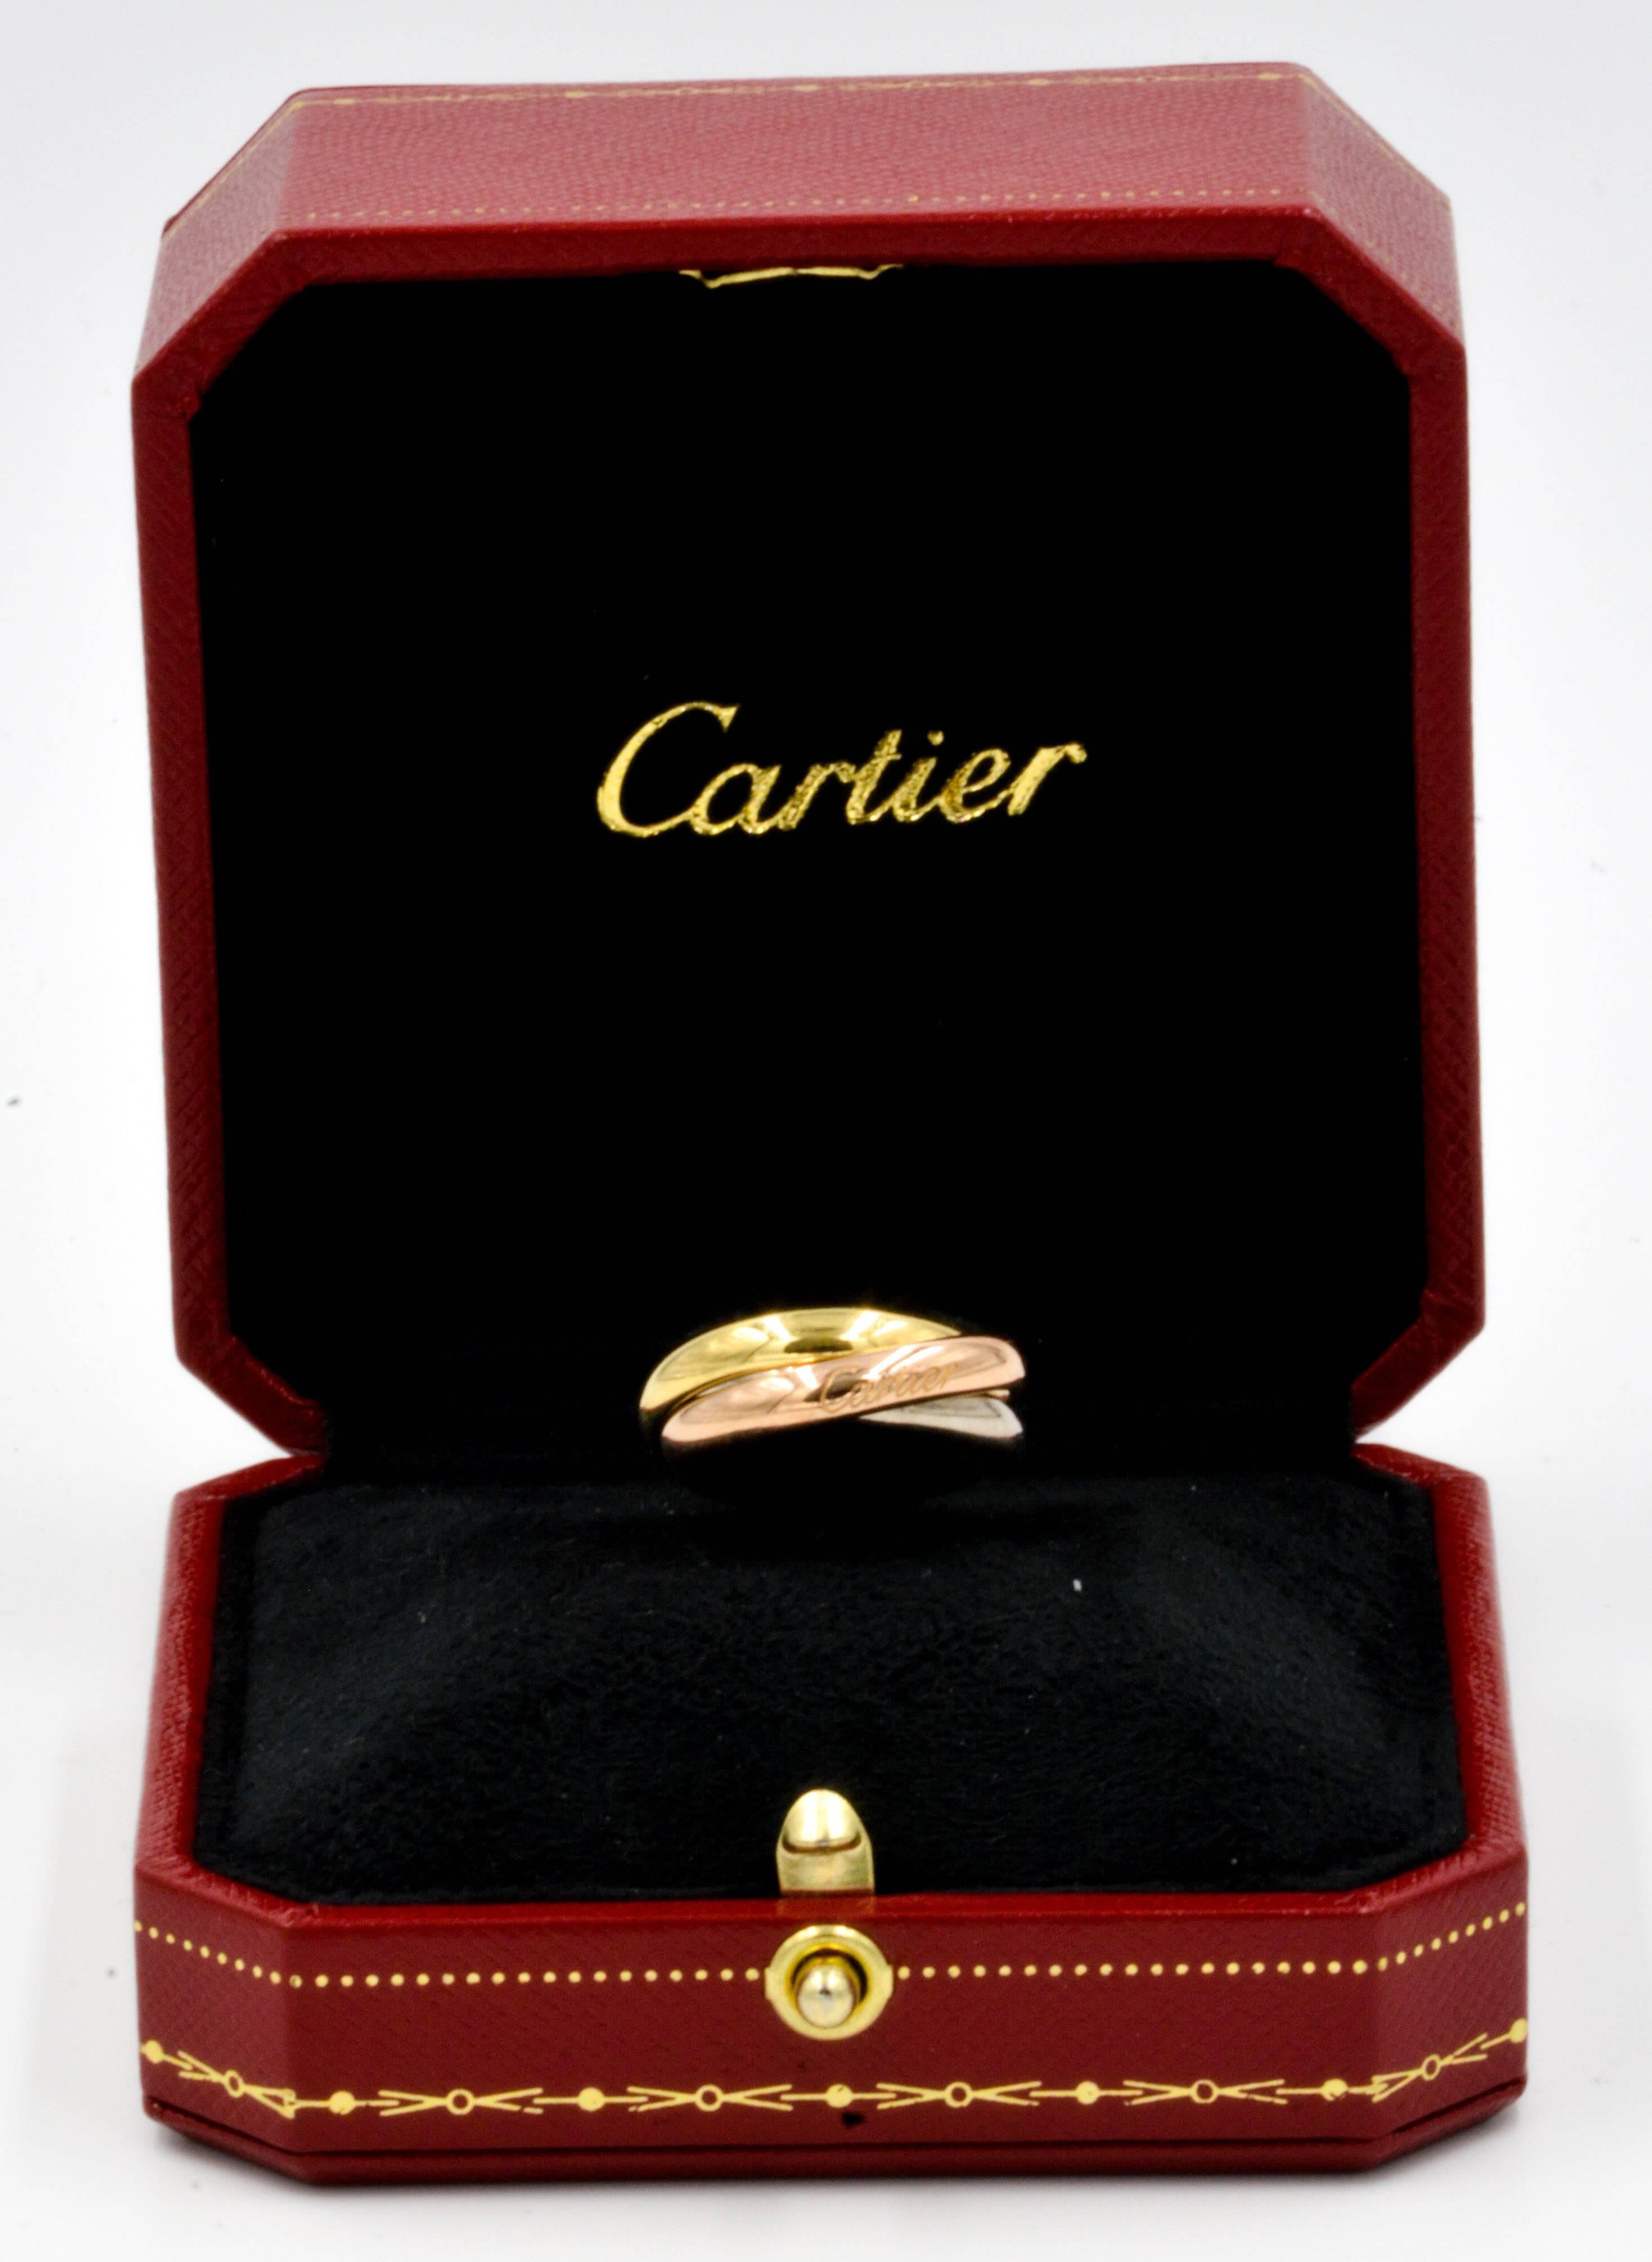 18kt yellow gold, rose gold, and platinum combine flawlessly in this classic Cartier trinity ring. With the Cartier name engraved on the outside and a unique design, this ring is sure to catch every eye. The ring is made to fit finger size 5, and